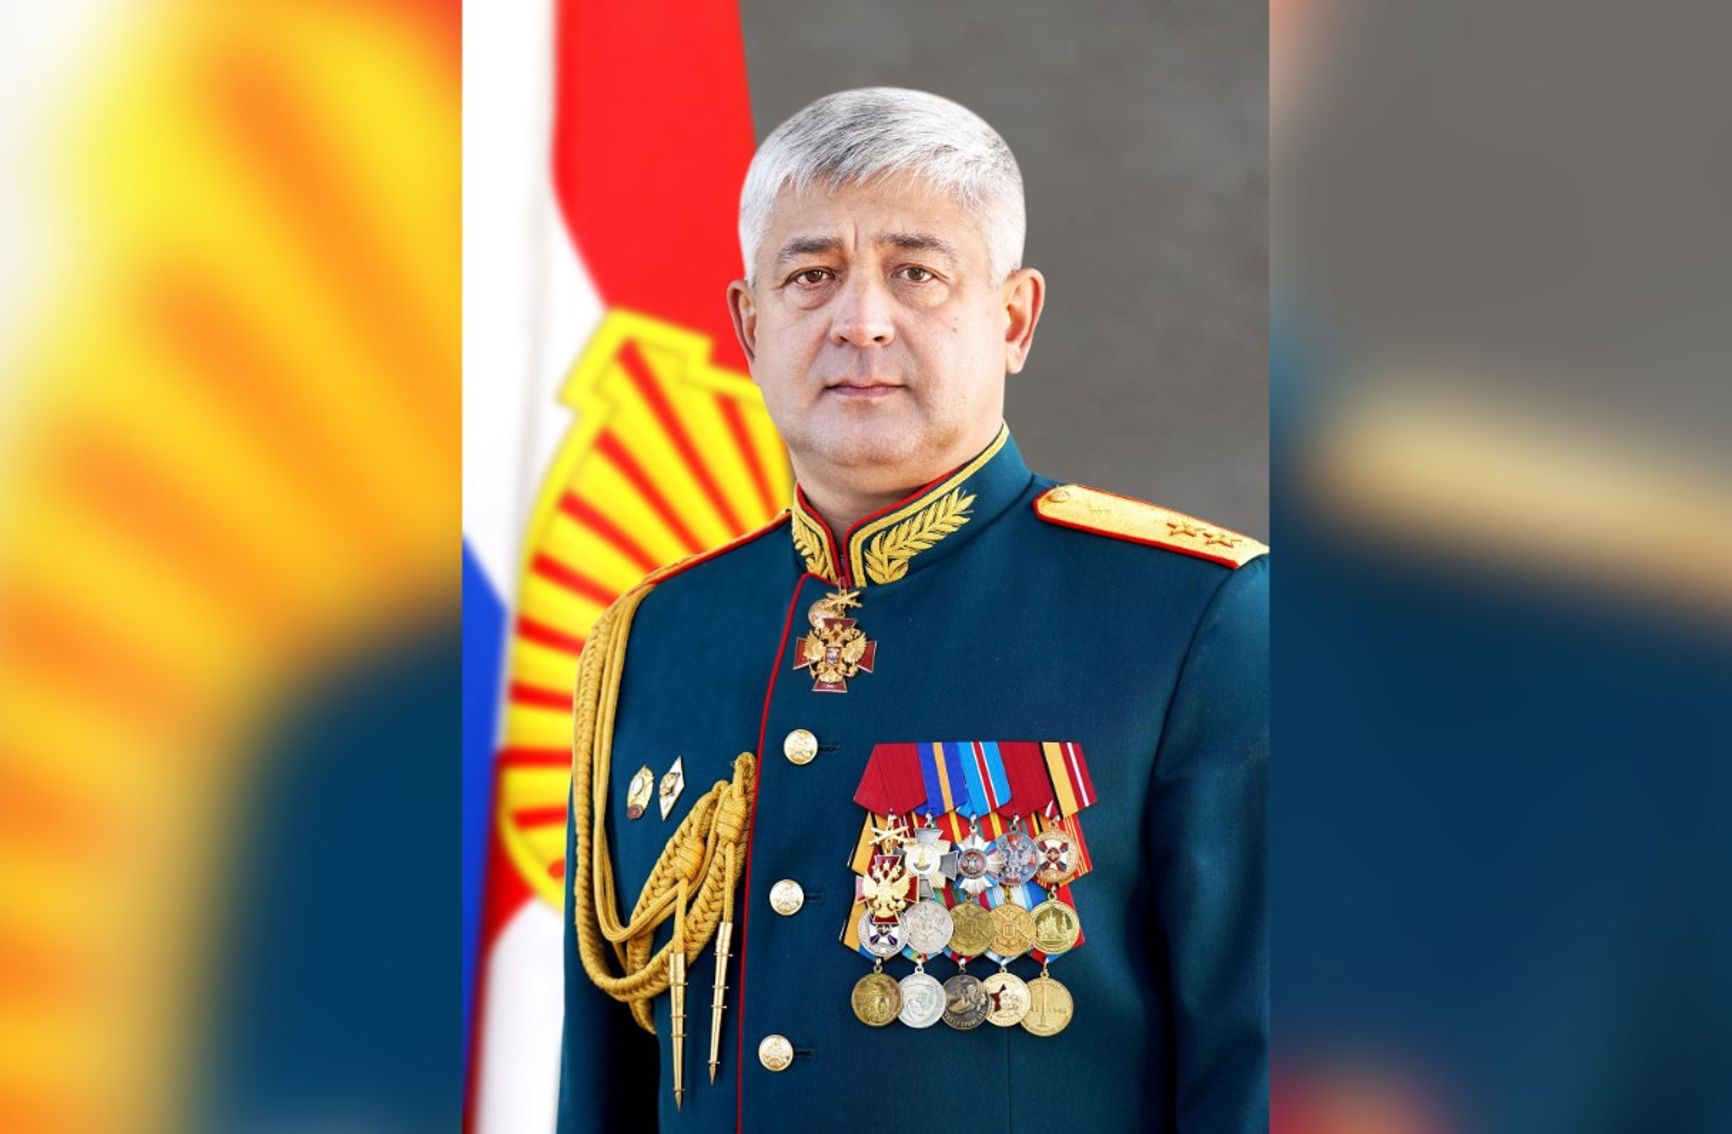 Lieutenant General Yevgeny Nikiforov, new commander of Russia's Western Military District